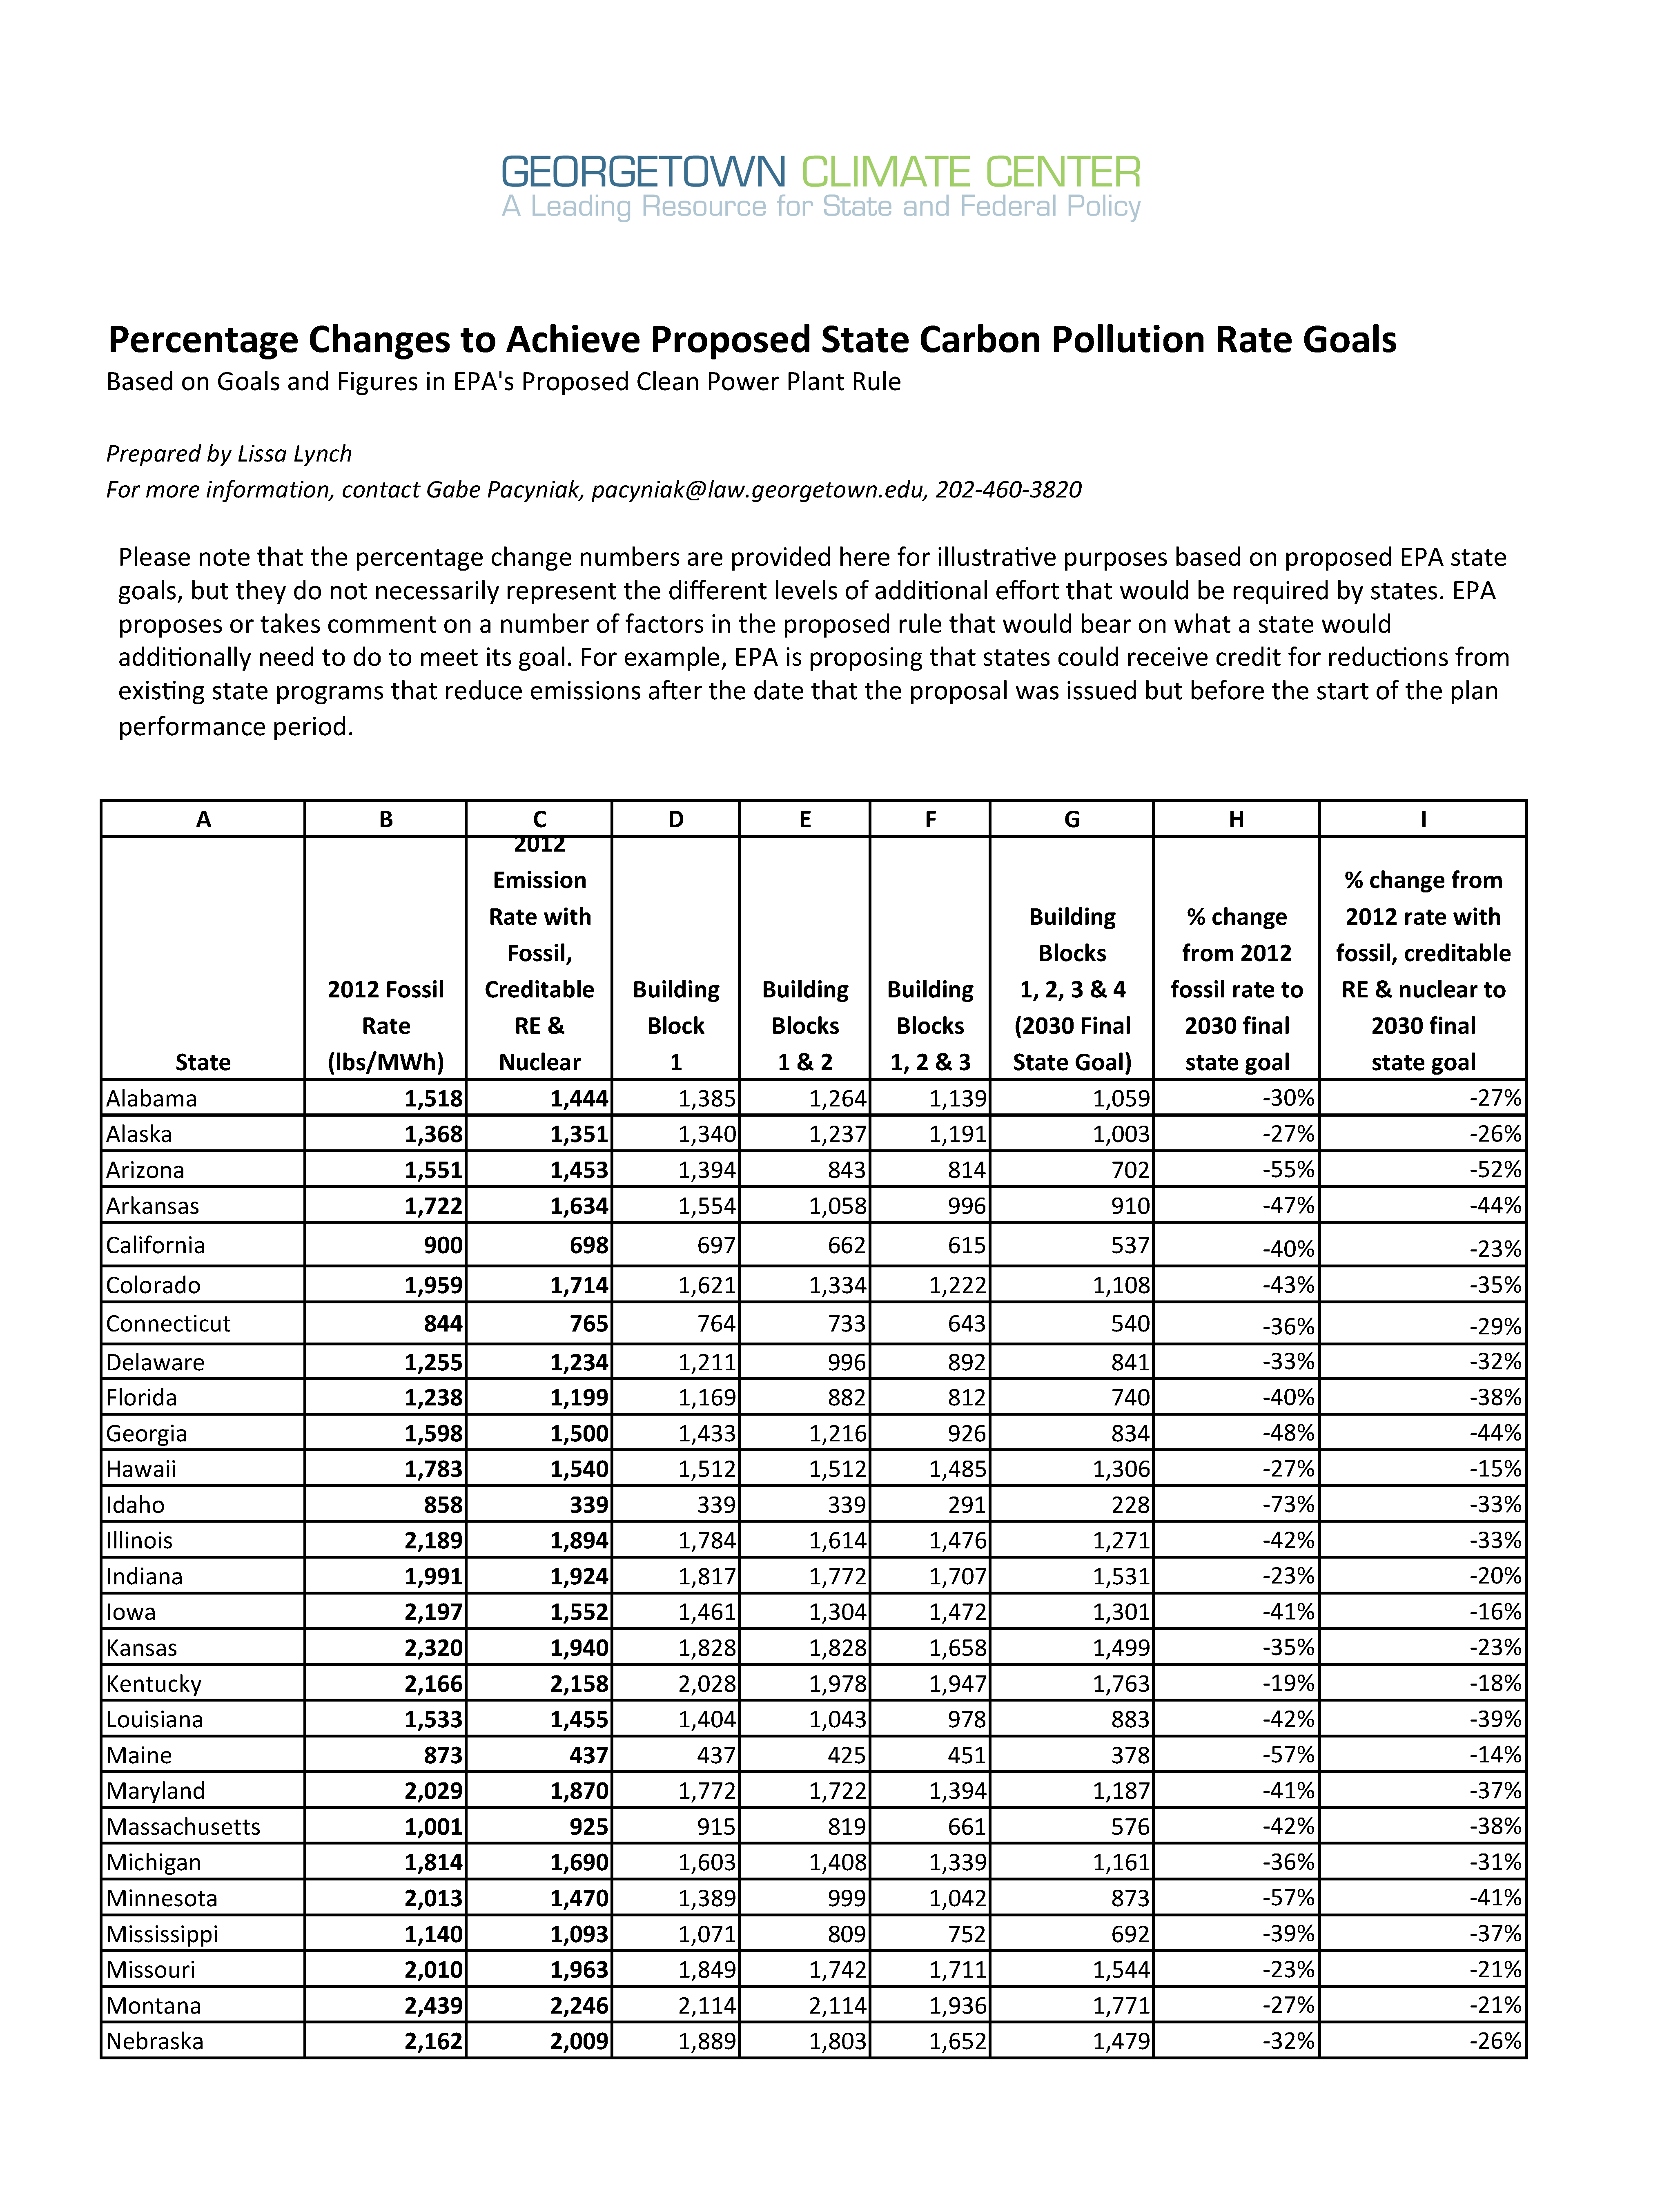 Percent Changes Needed to Acheive EPA's State-by-State Carbon Pollution Goals